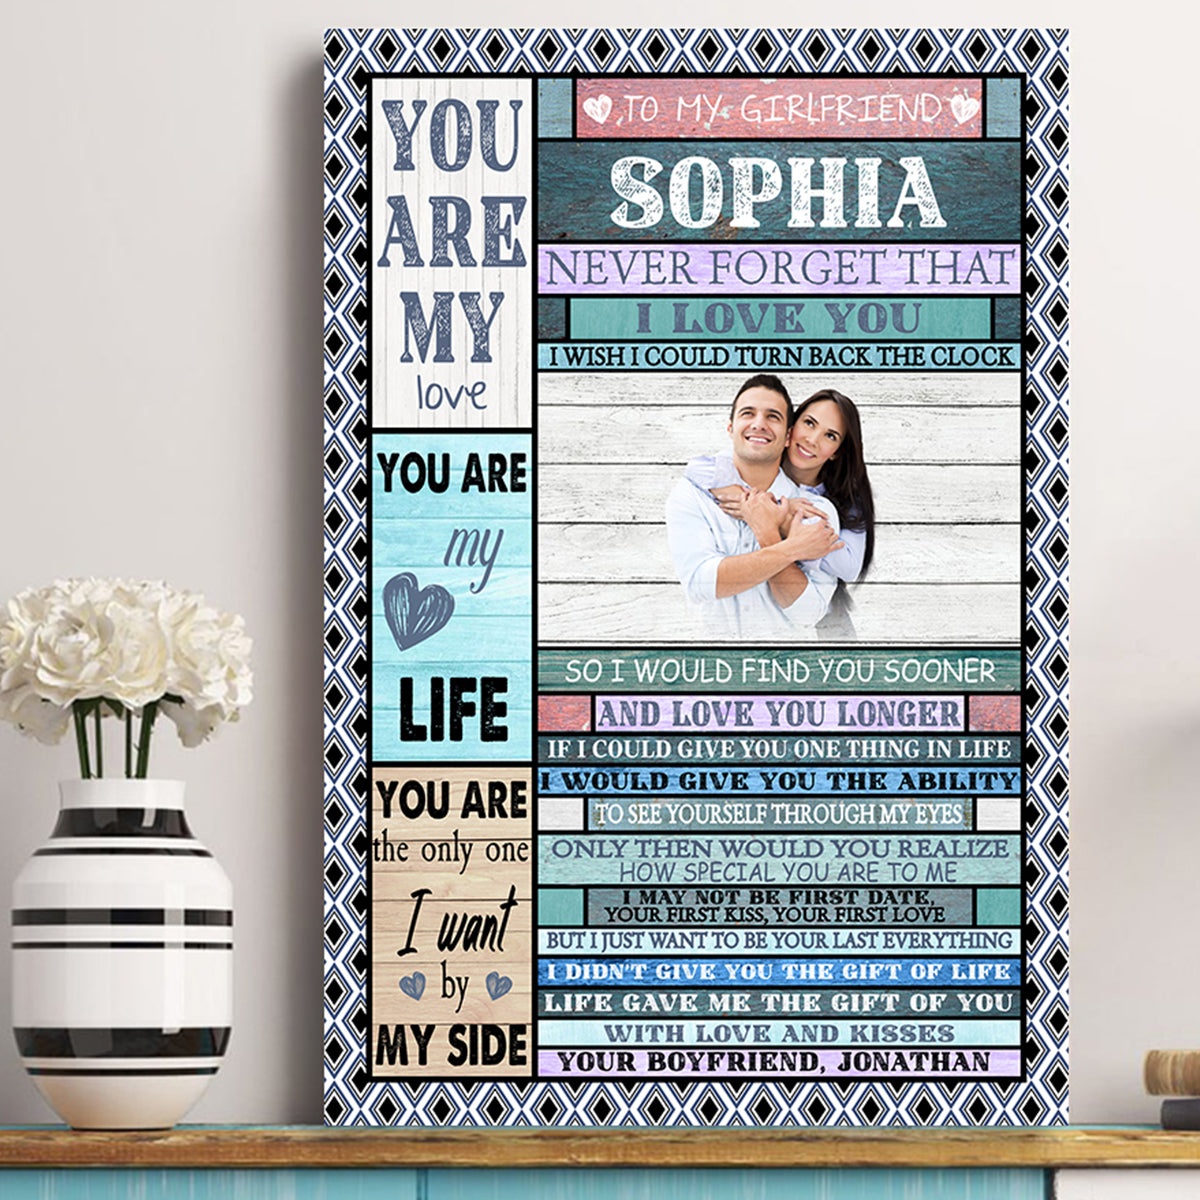 To My Girlfriend You Are My Life - Personalized Canvas - Gift For Girlfriend